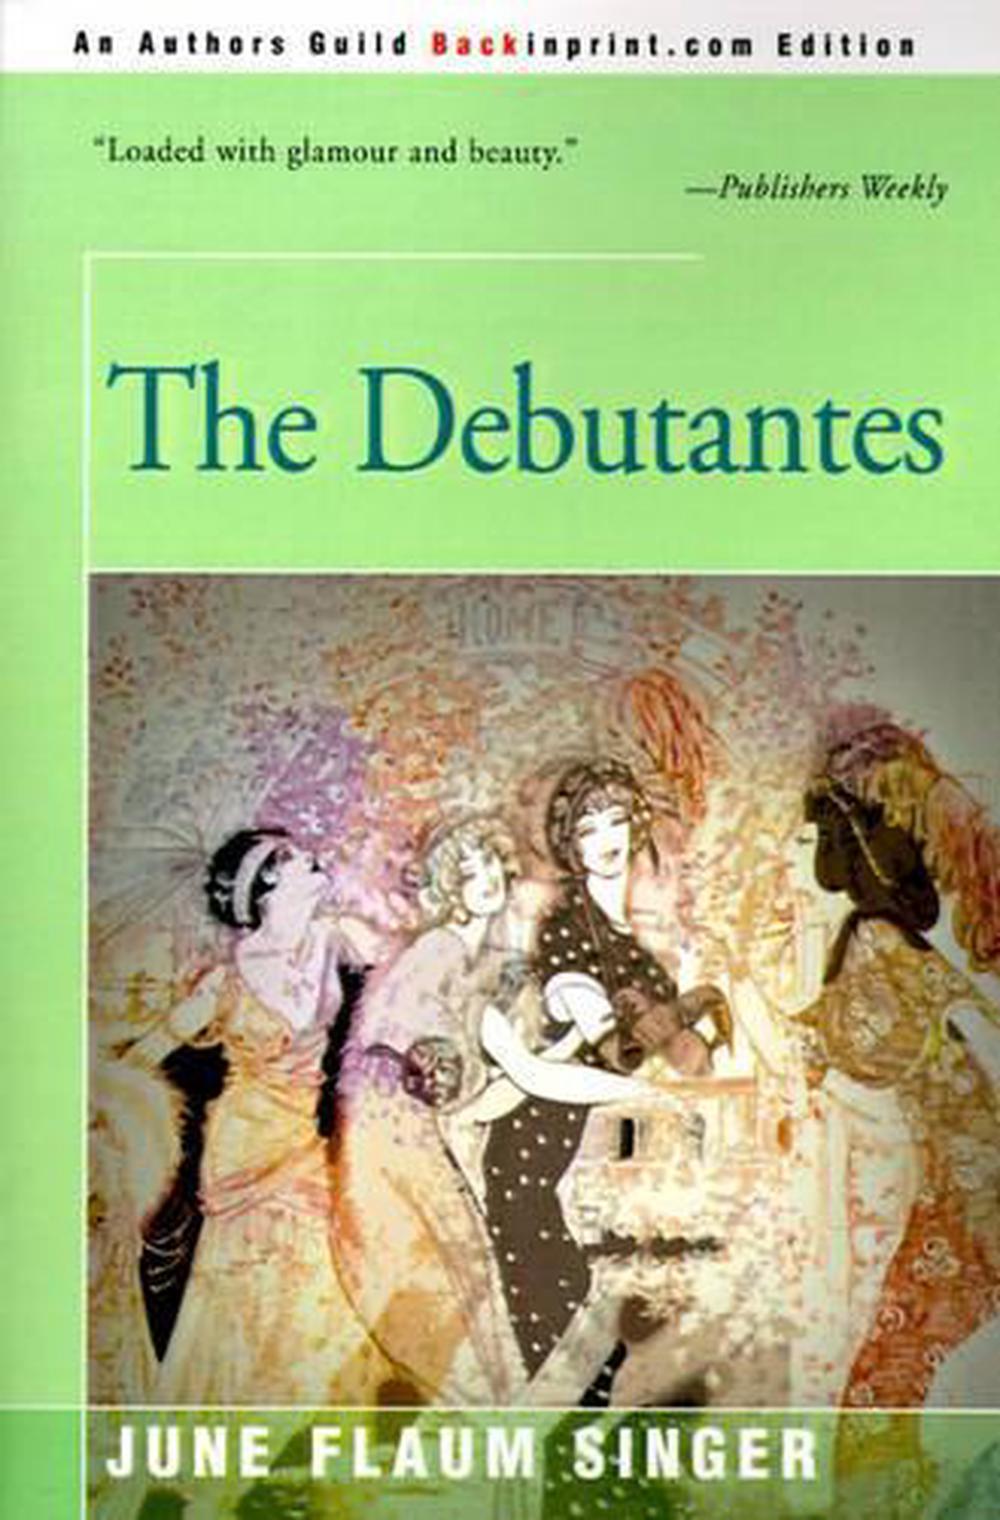 The Duplicitous Debutante by Becky Lower